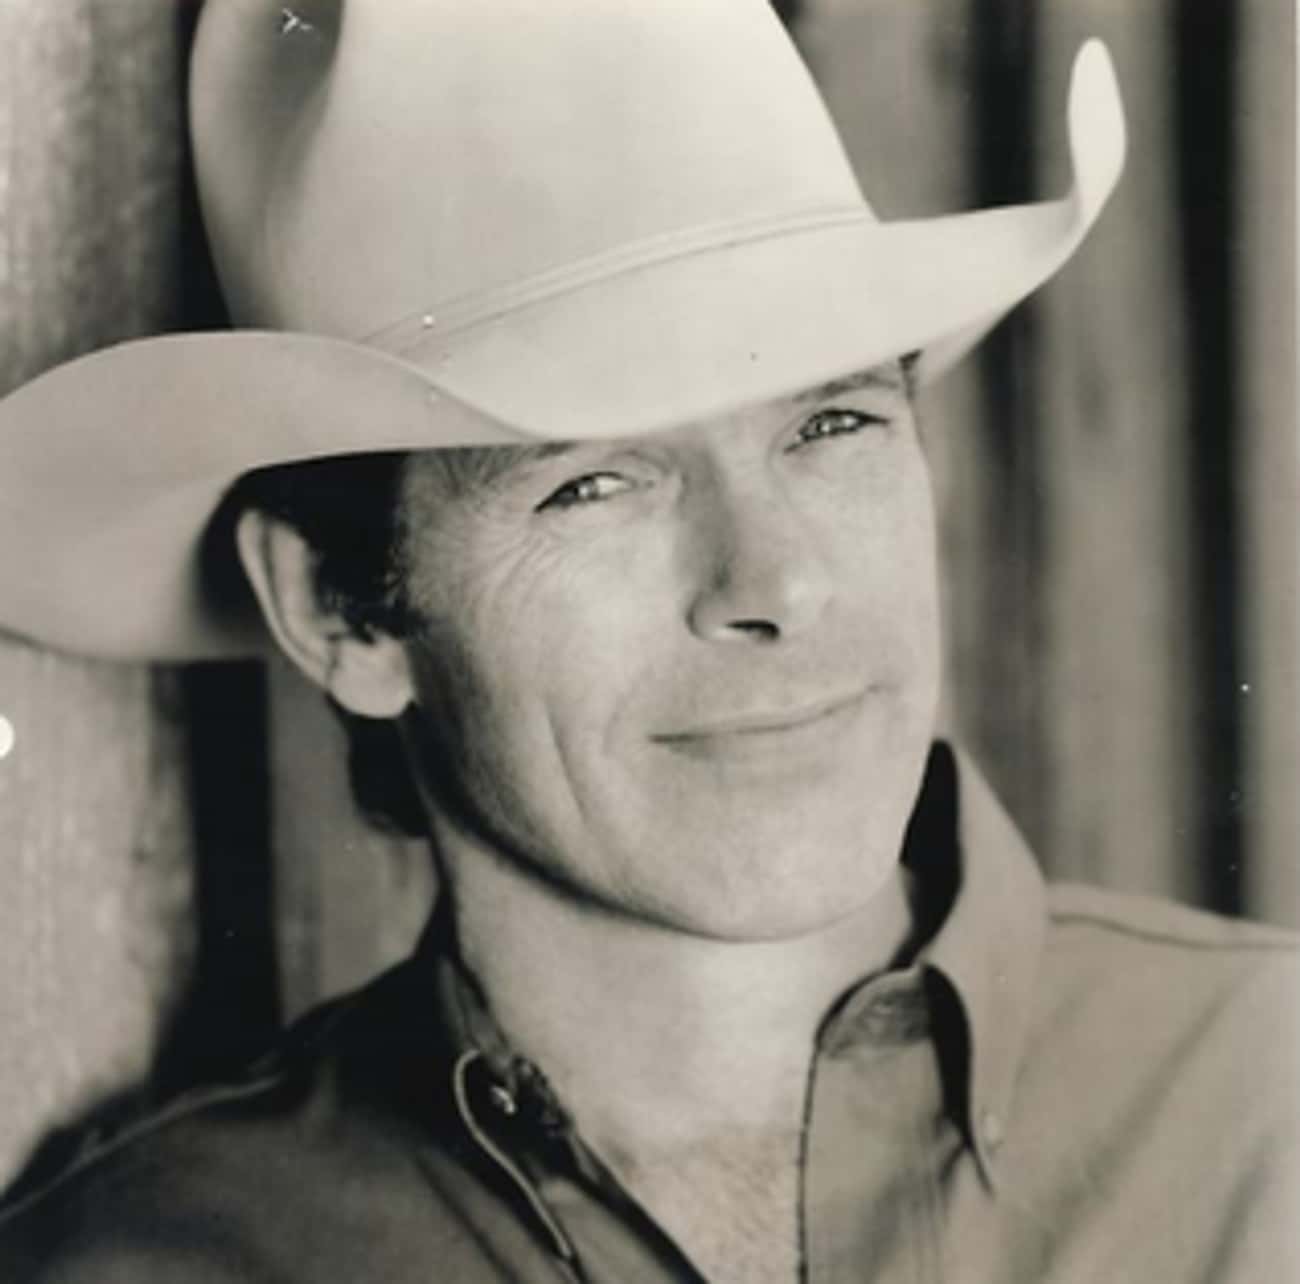 Country Singer Chris LeDoux Said Brooks Was His Guardian Angel